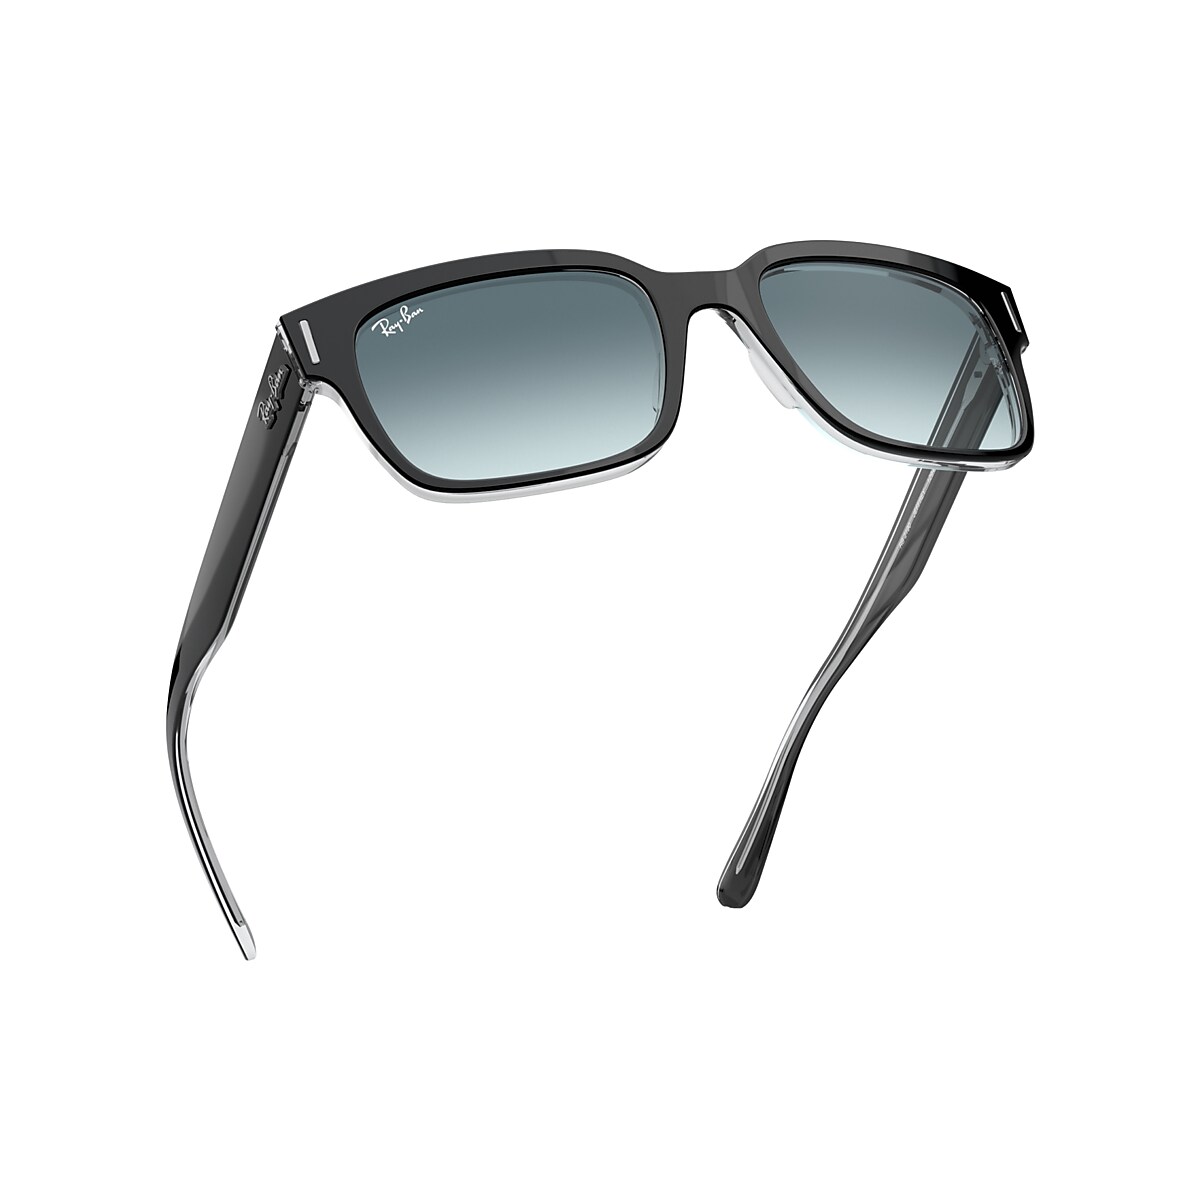 JEFFREY Sunglasses in Black On Transparent and Blue - RB2190 | Ray 